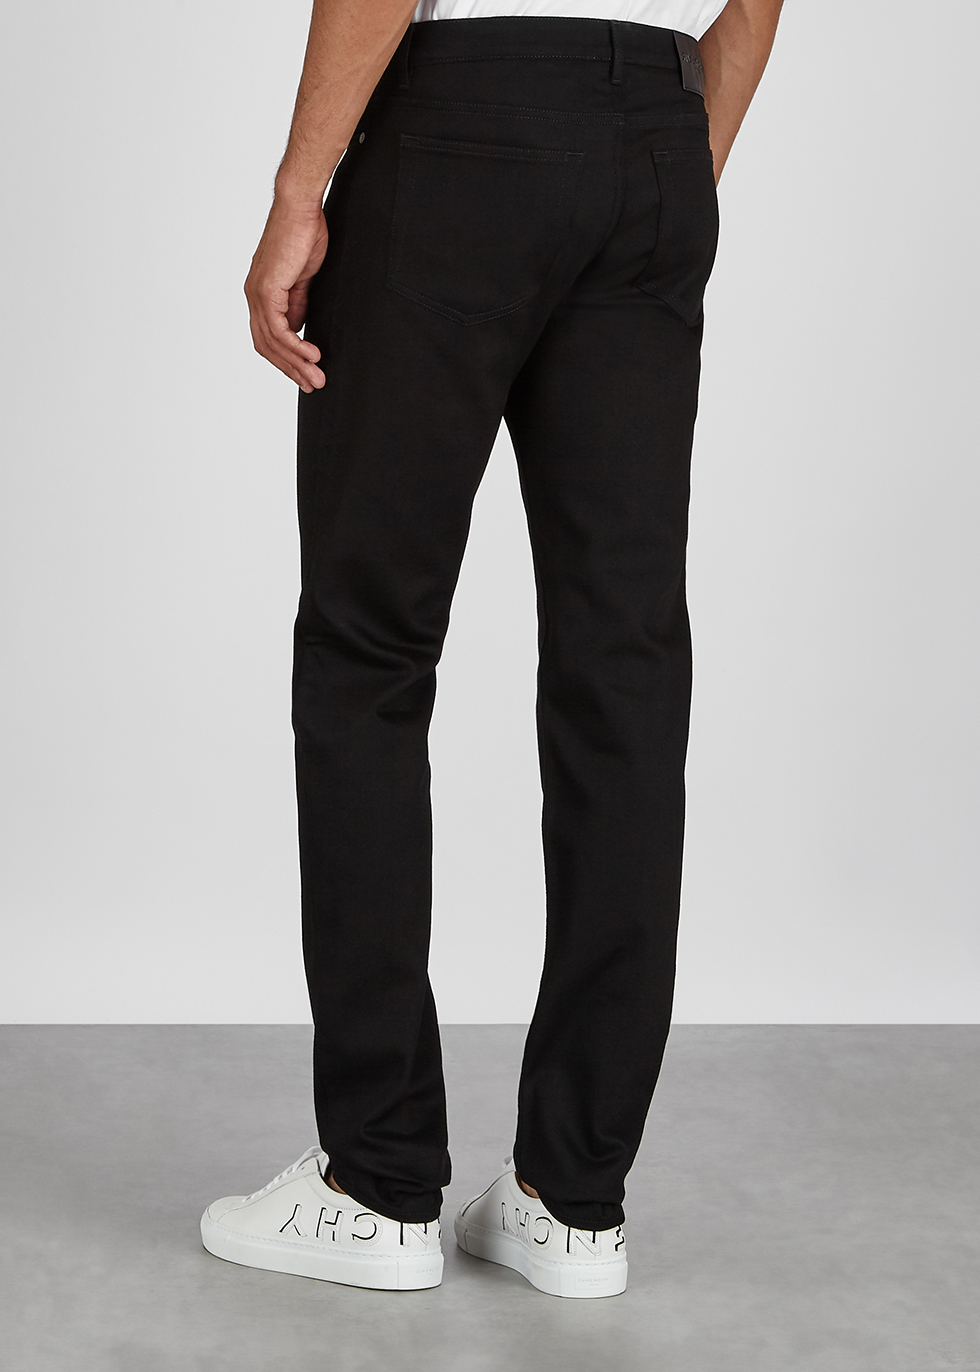 givenchy black jeans